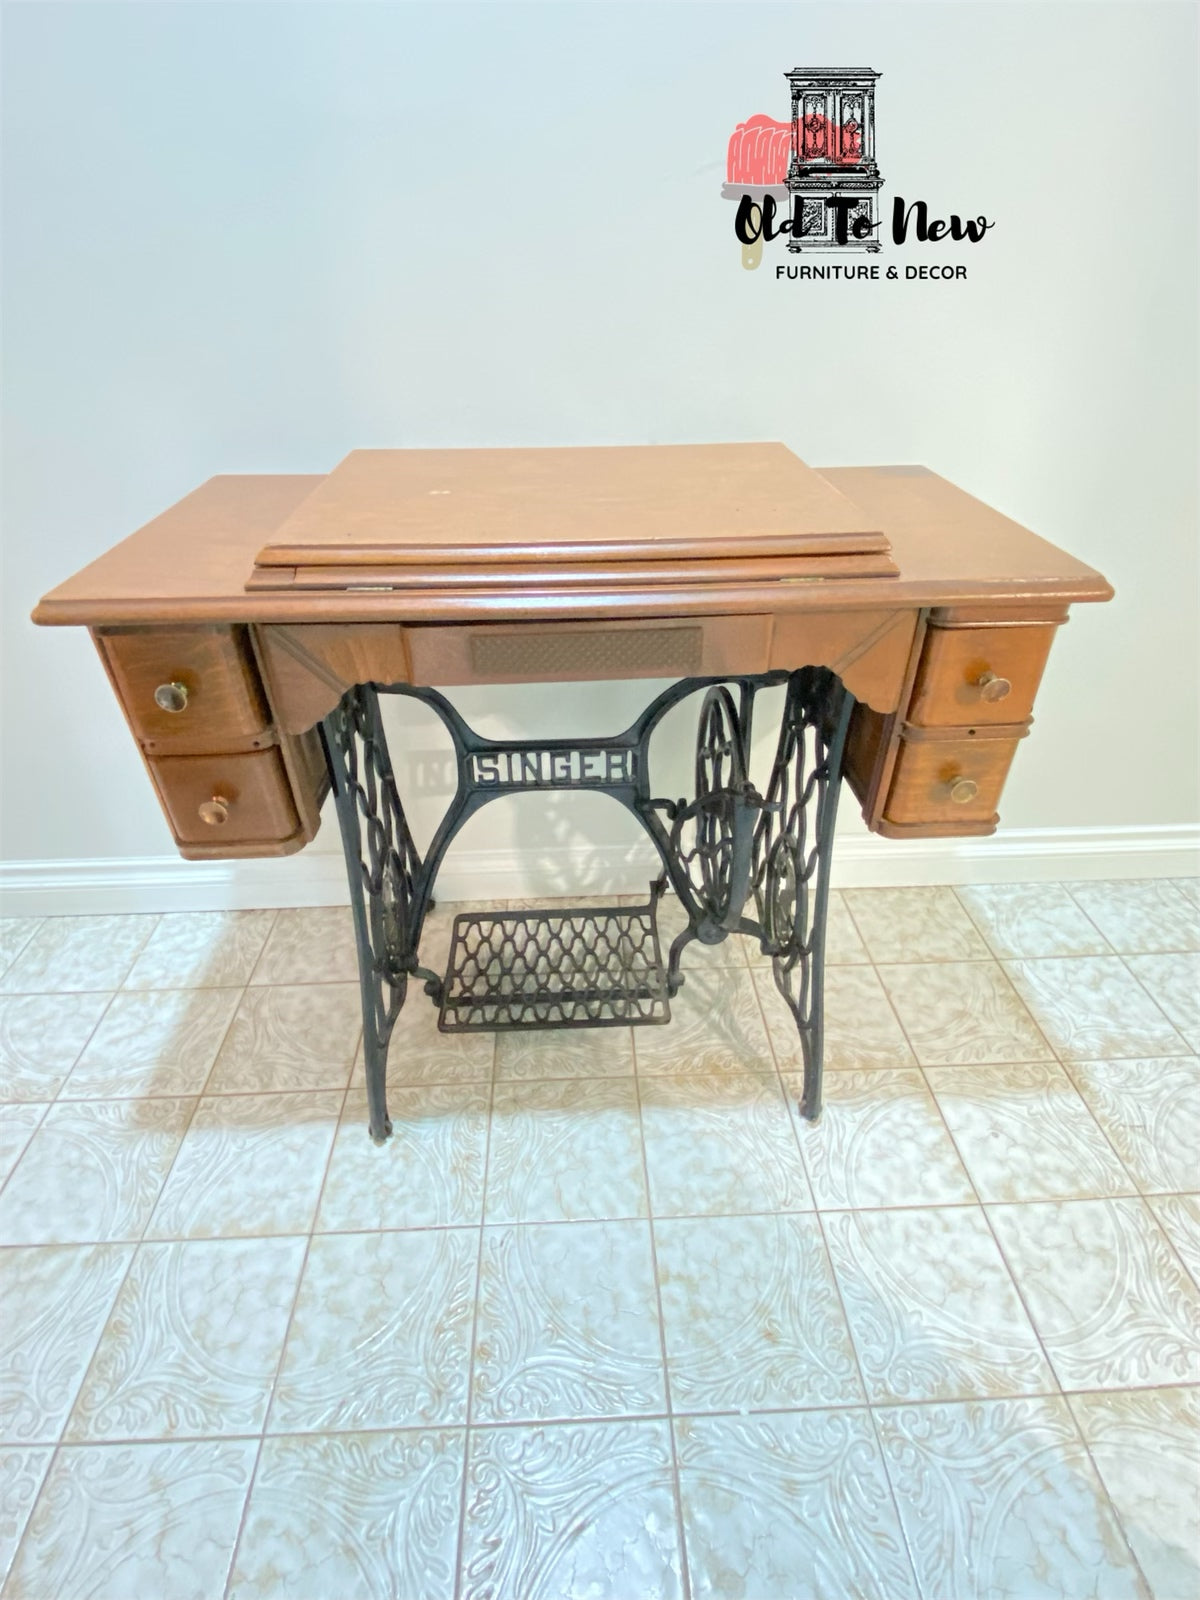 Professionally Refinished Antique Singer Sewing Machine; Painted Beige With Annie Sloan Chalk Paint